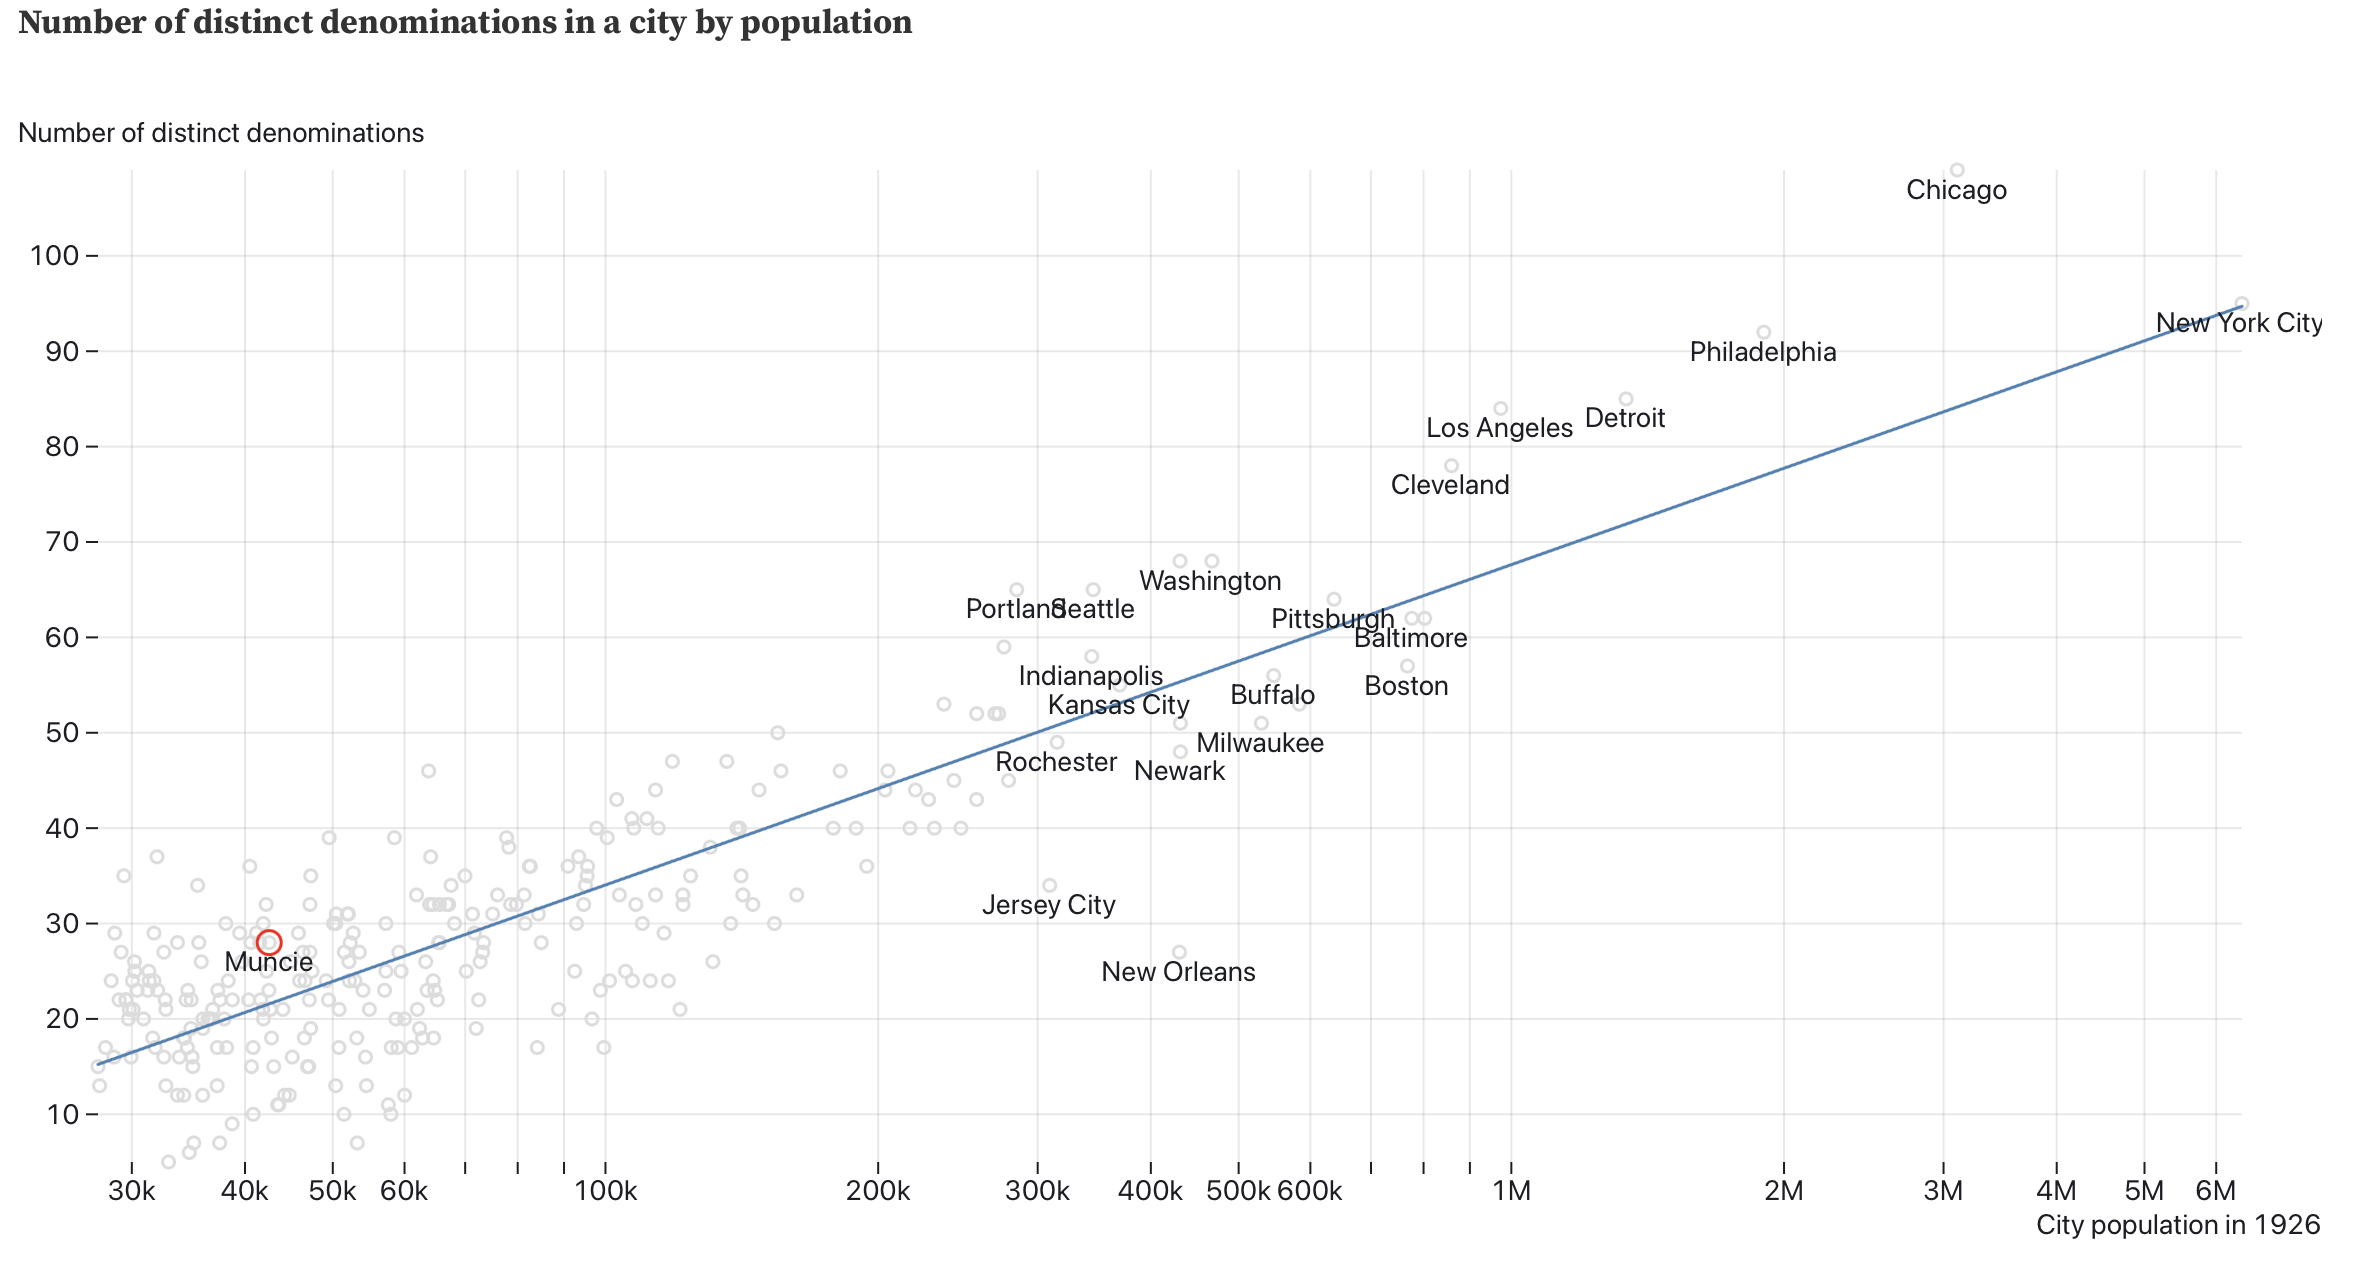 A visualization comparing religious diversity in U.S. cities